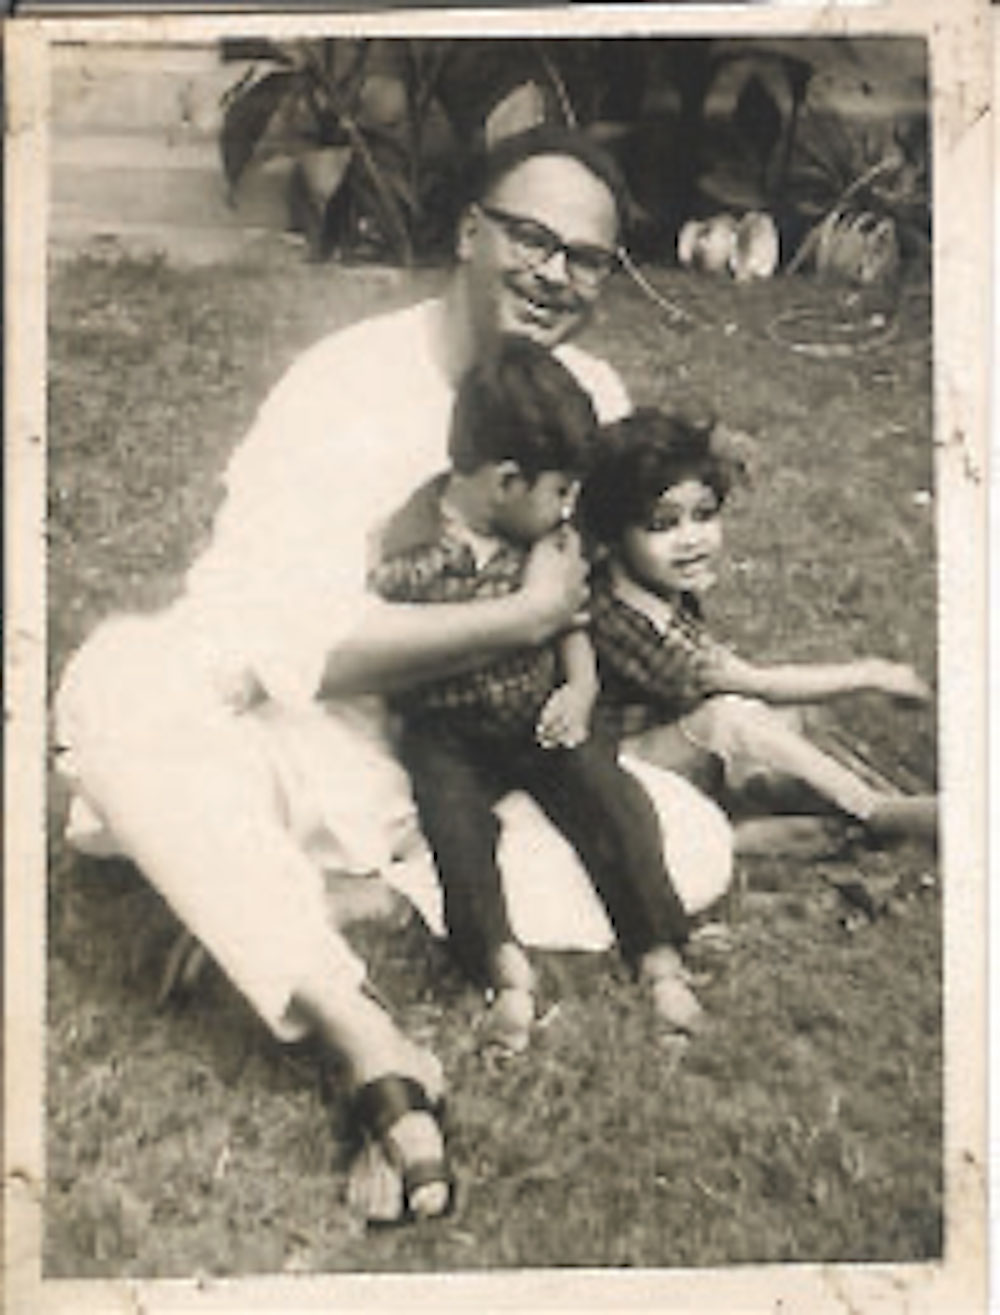 Zawwar Hasan and his nieces in the 1960s